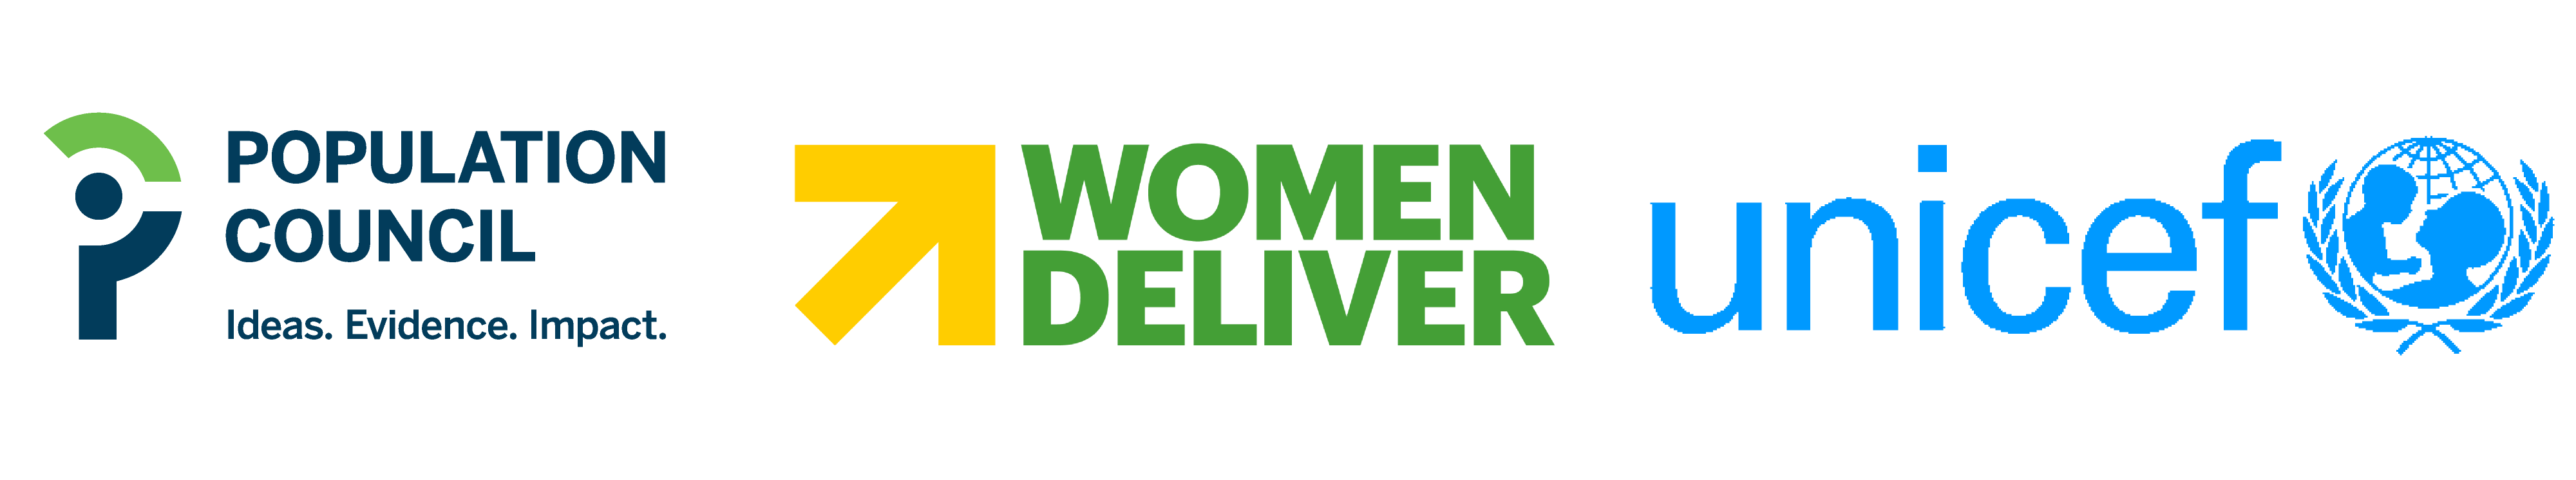 Population Council, Women Deliver, and UNICEF logos